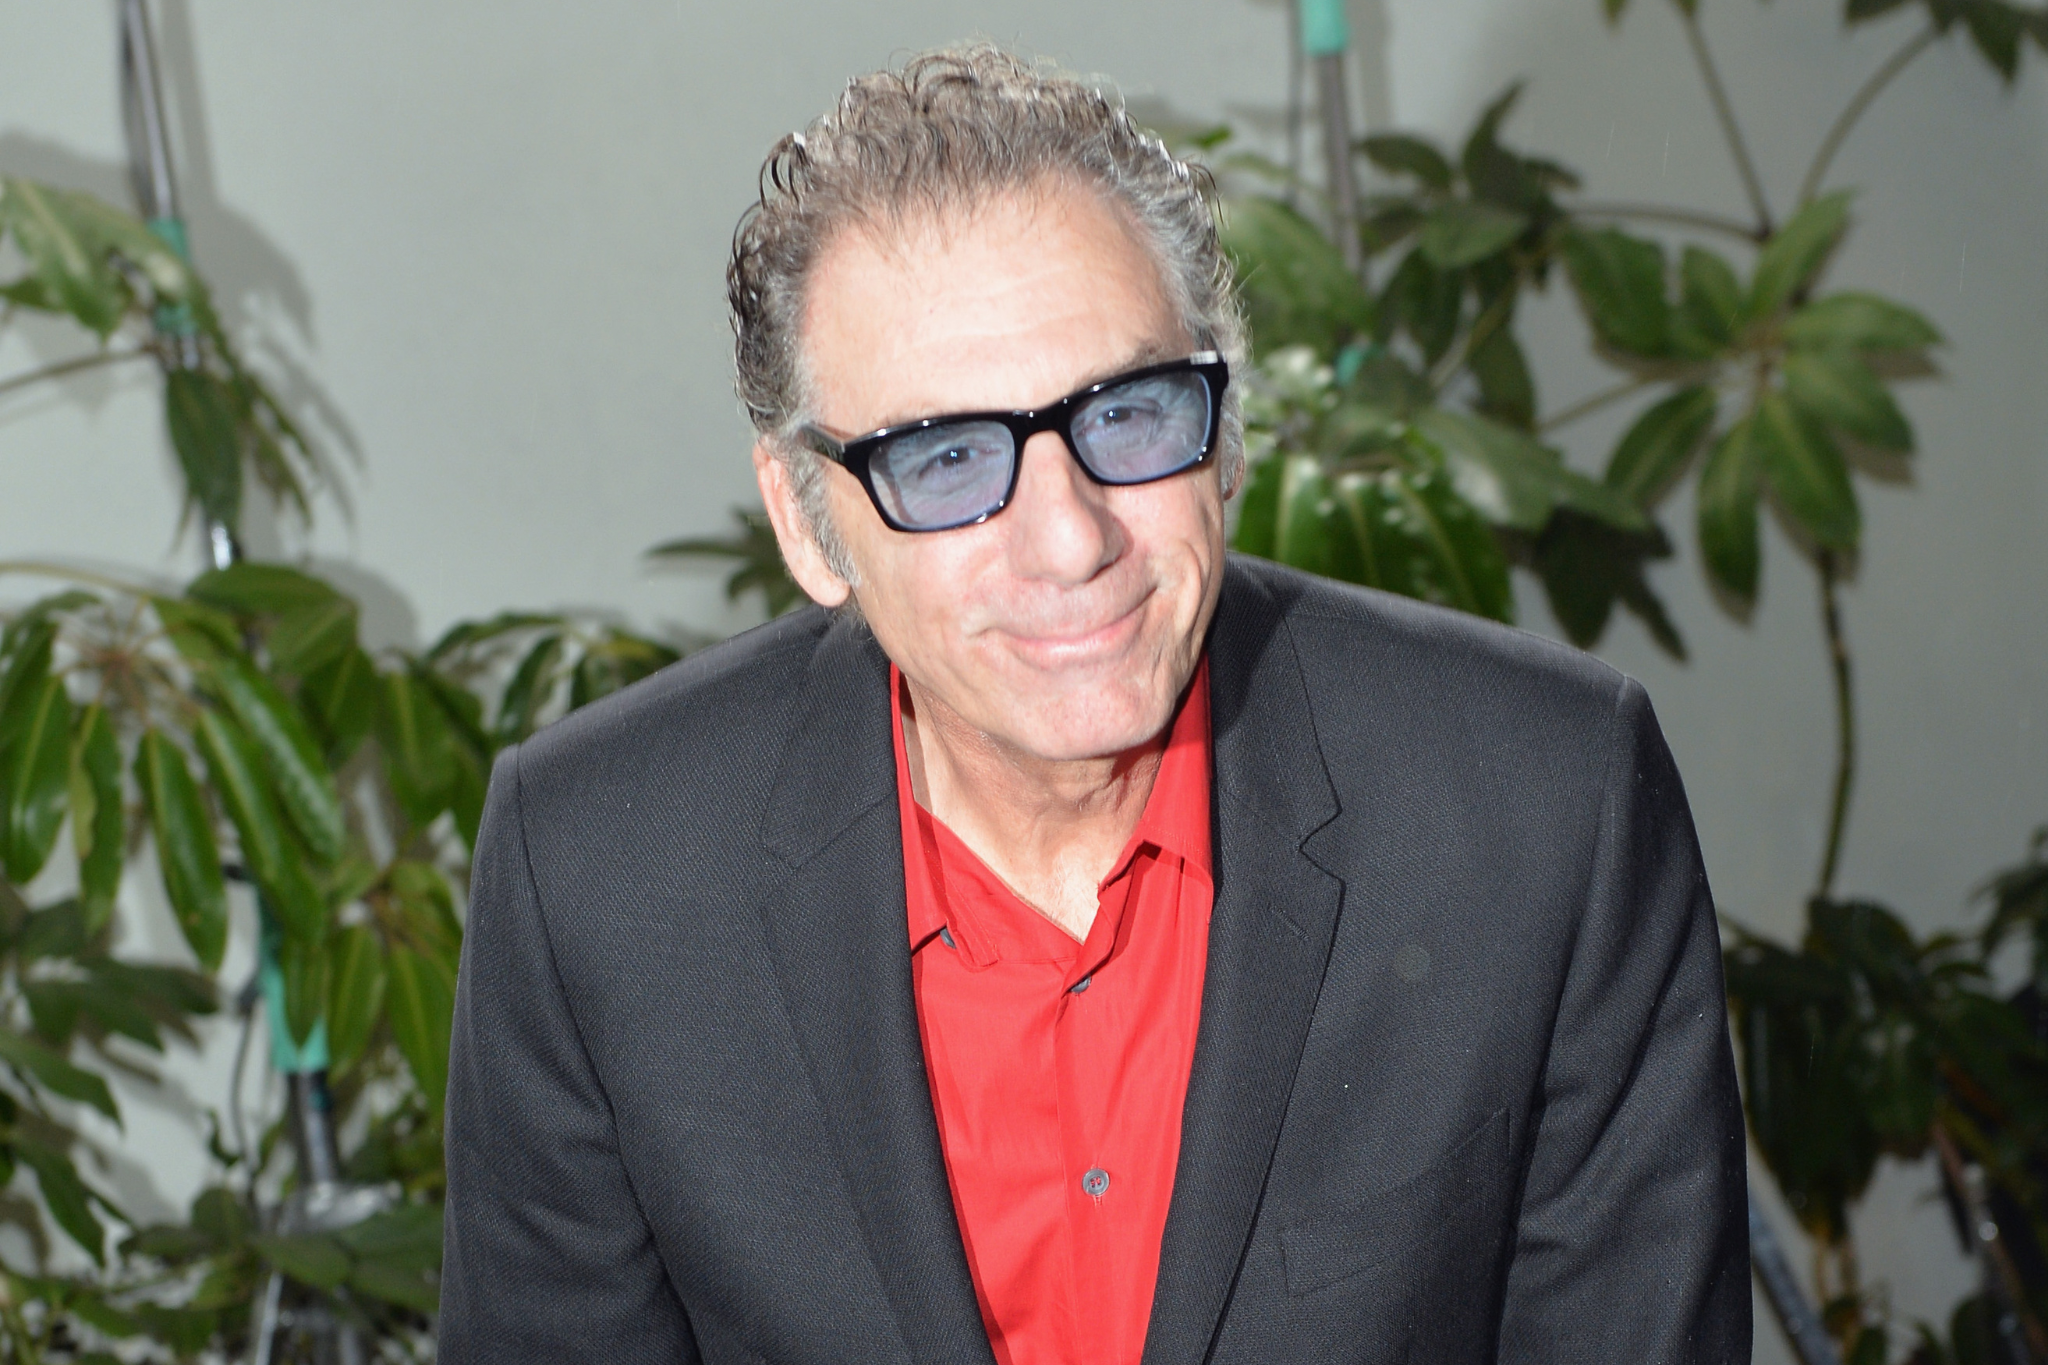 michael richards, prostate cancer, seinfeld, seinfeld’s michael richards on his life-saving cancer surgery and why he regrets racist outburst to this day